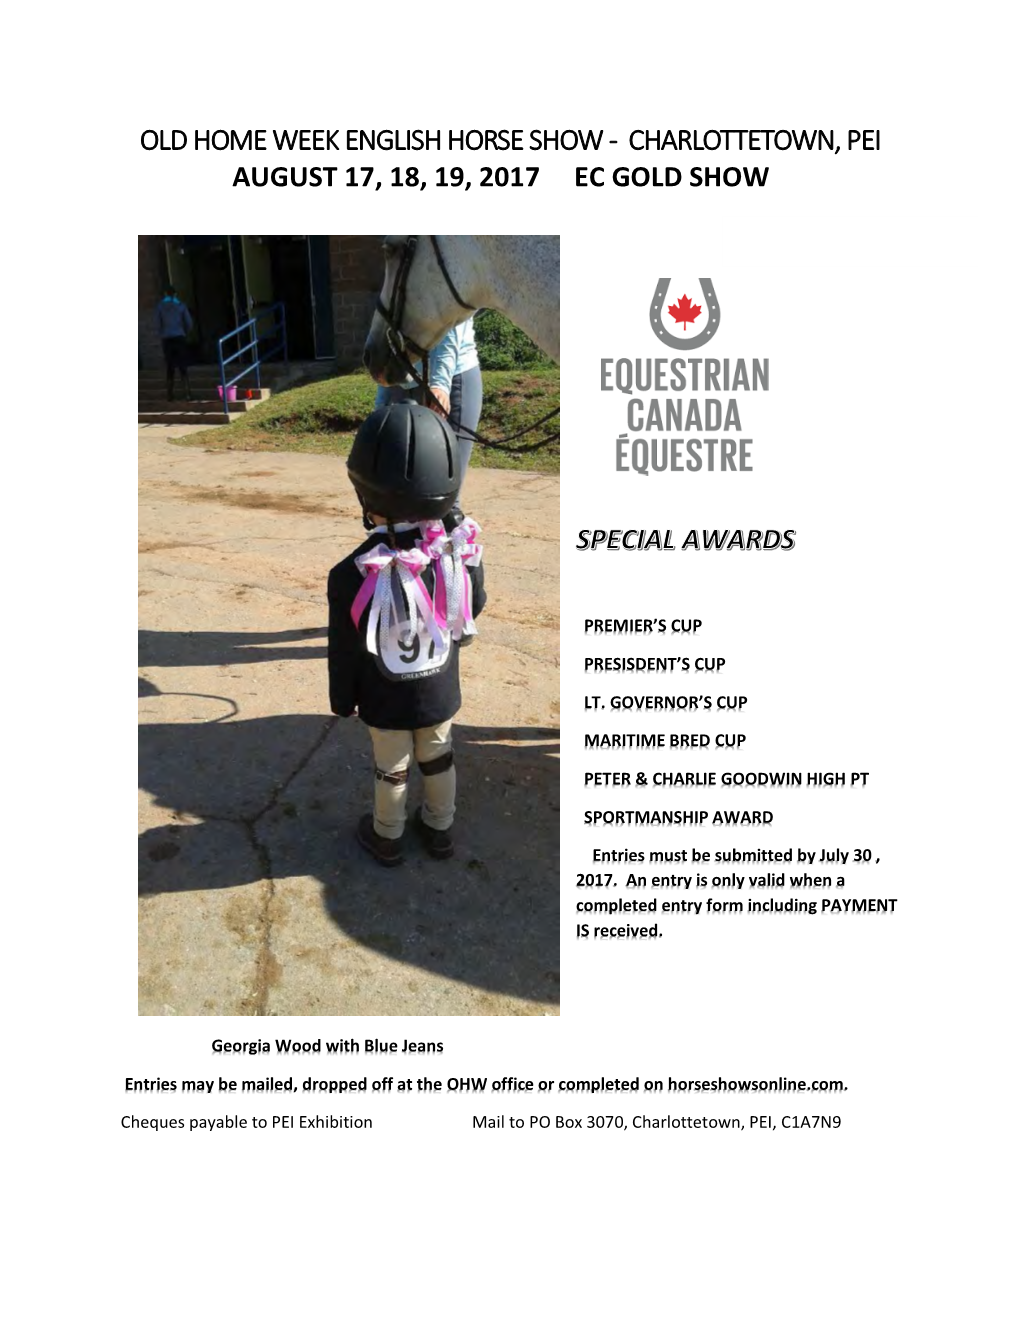 Old Home Week English Horse Show - Charlottetown, Pei August 17, 18, 19, 2017 Ec Gold Show